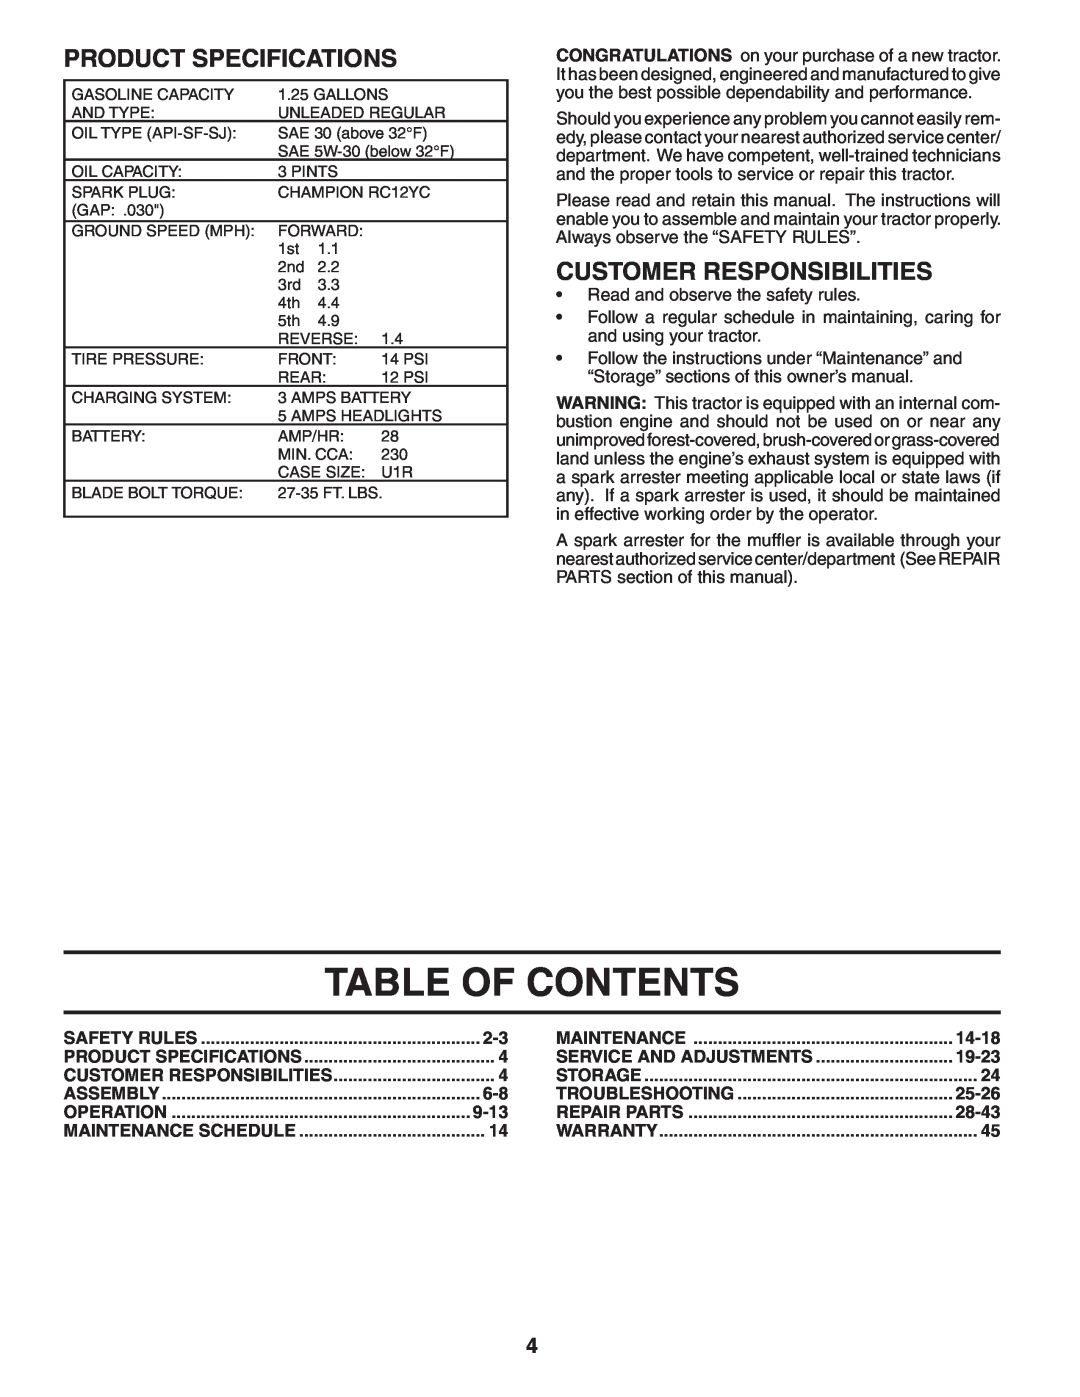 Weed Eater WE1538C, 186778 manual Table Of Contents, Product Specifications, Customer Responsibilities 